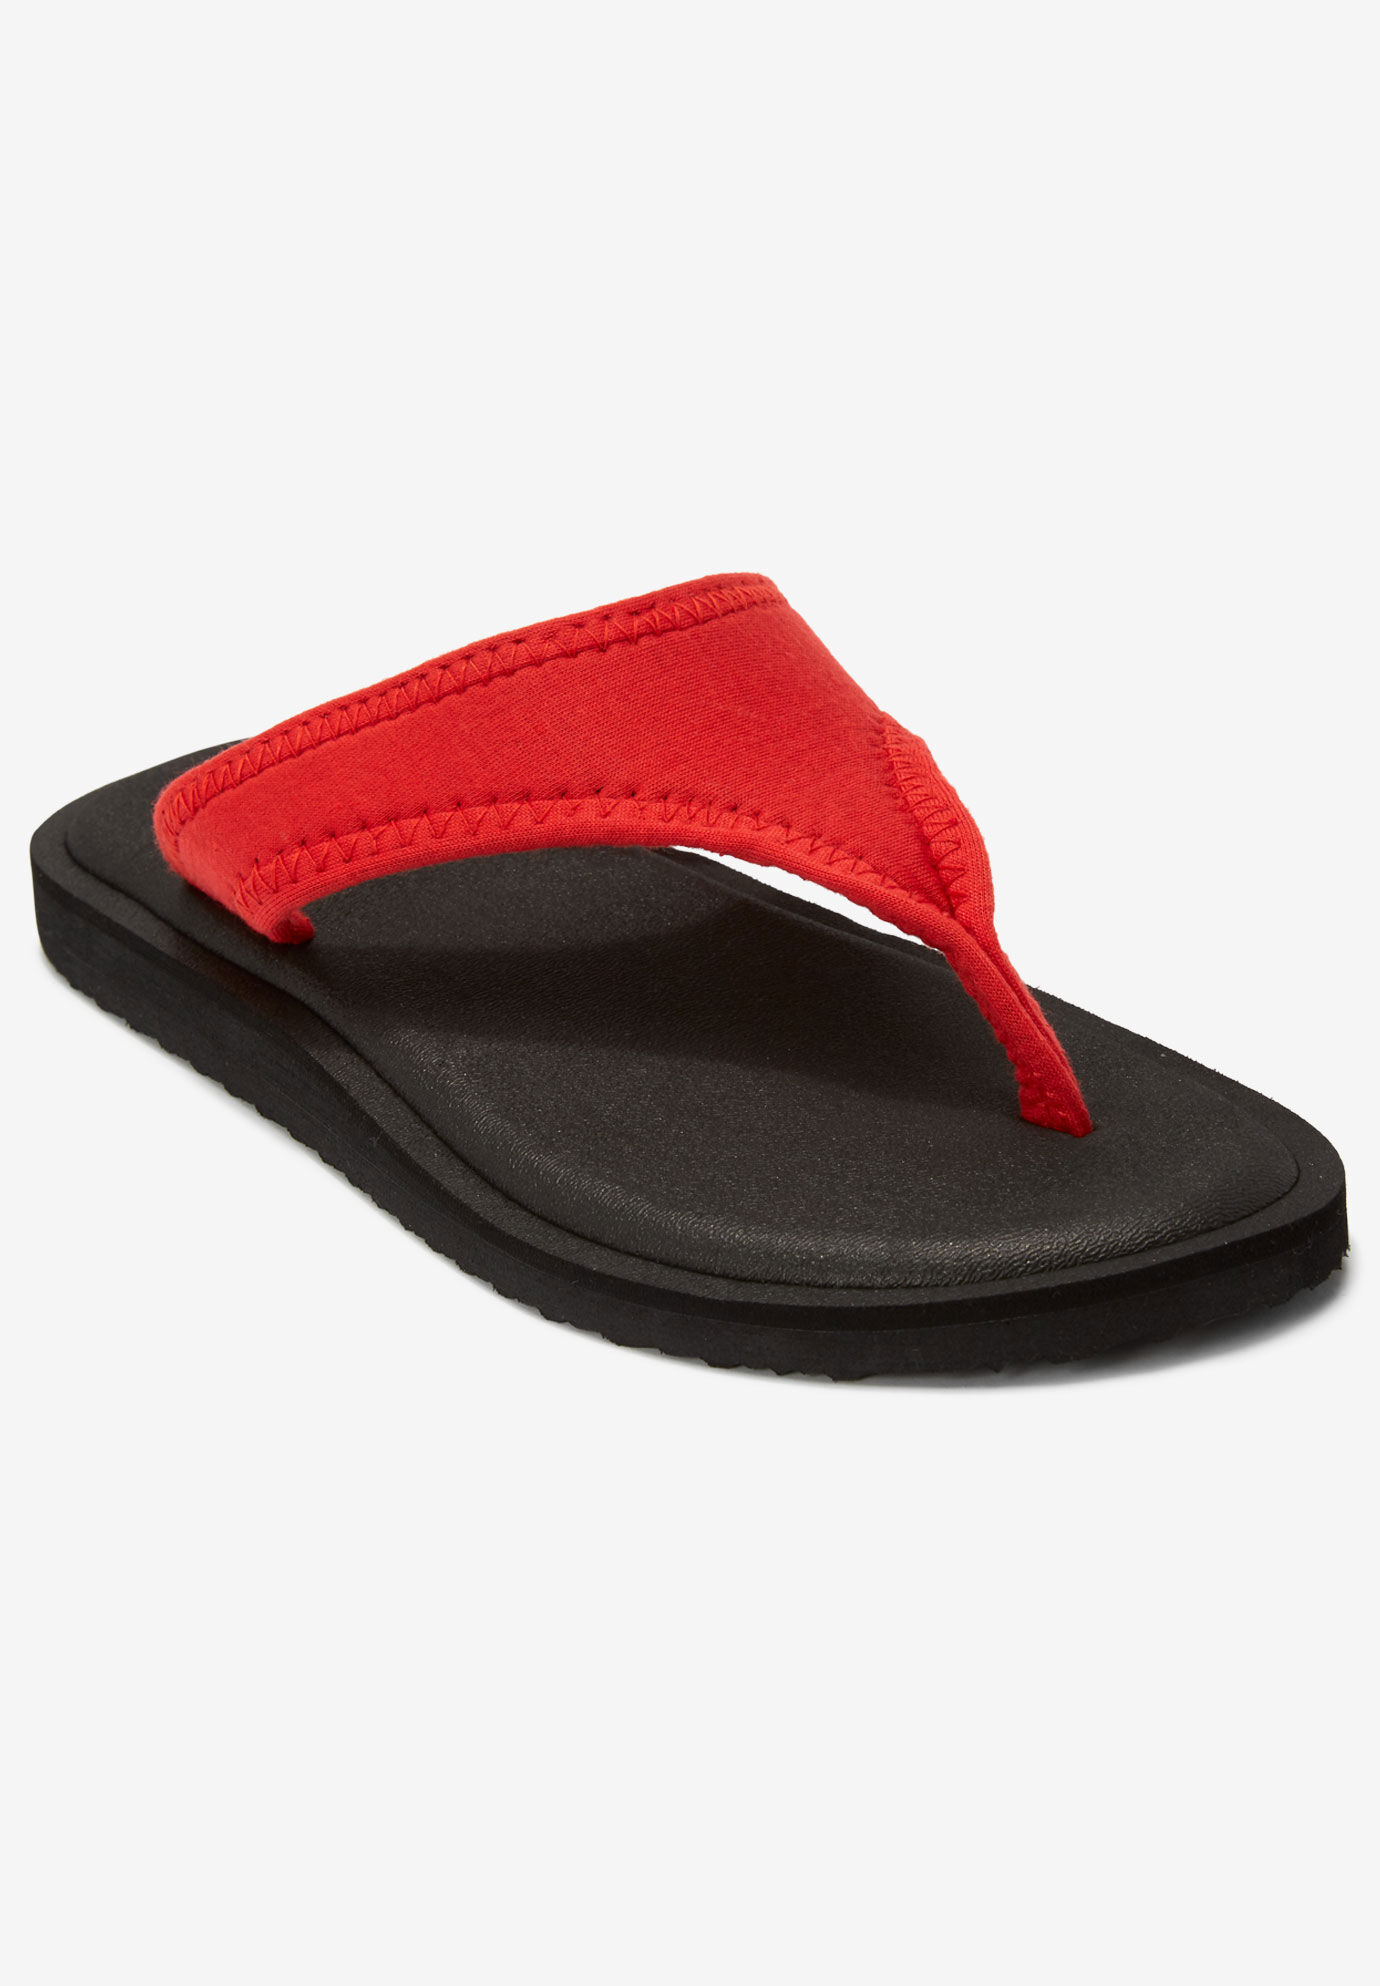 Extra Wide Width Sandals for Women 